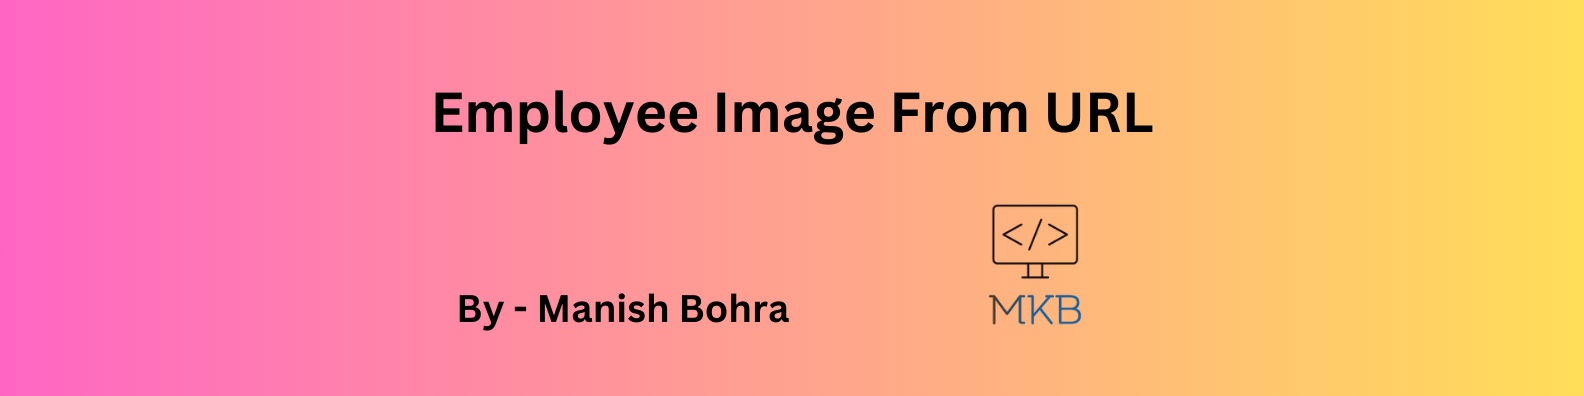 Employee Image From URL